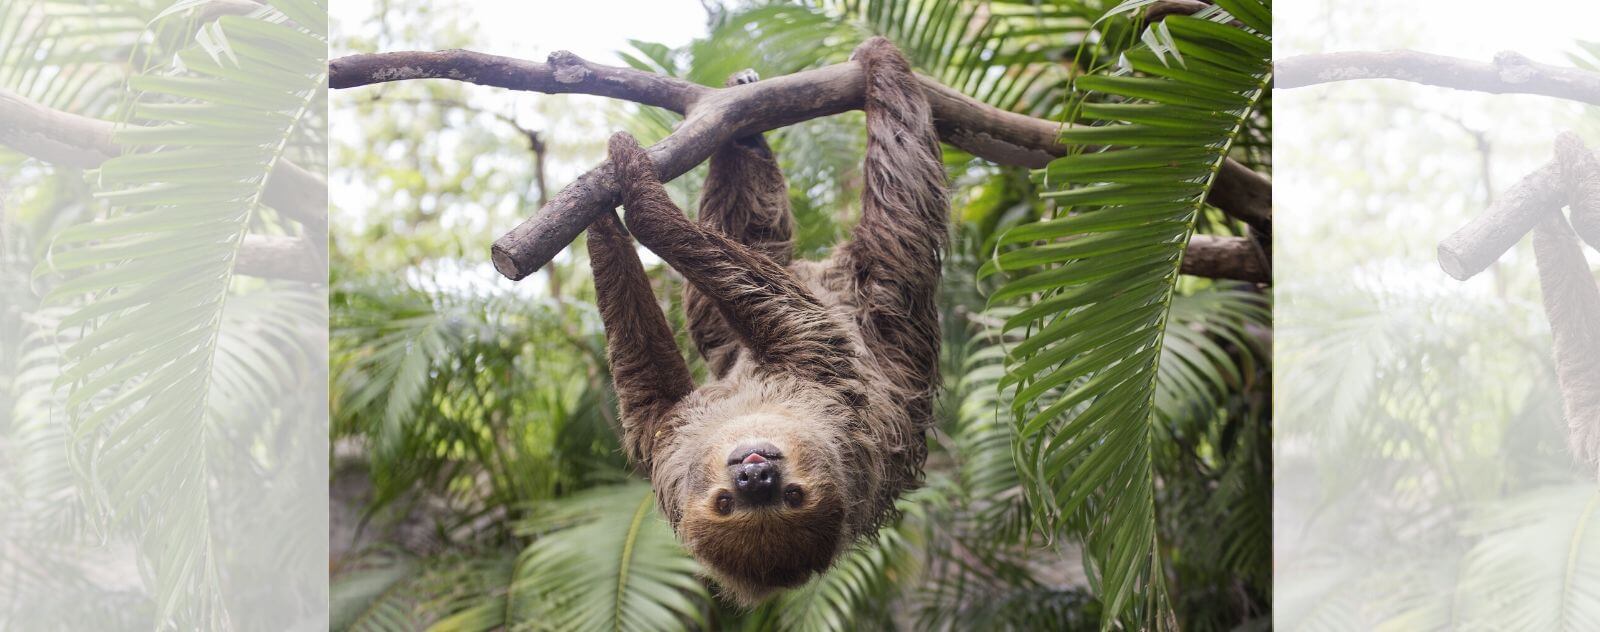 Sloth sticking out its tongue